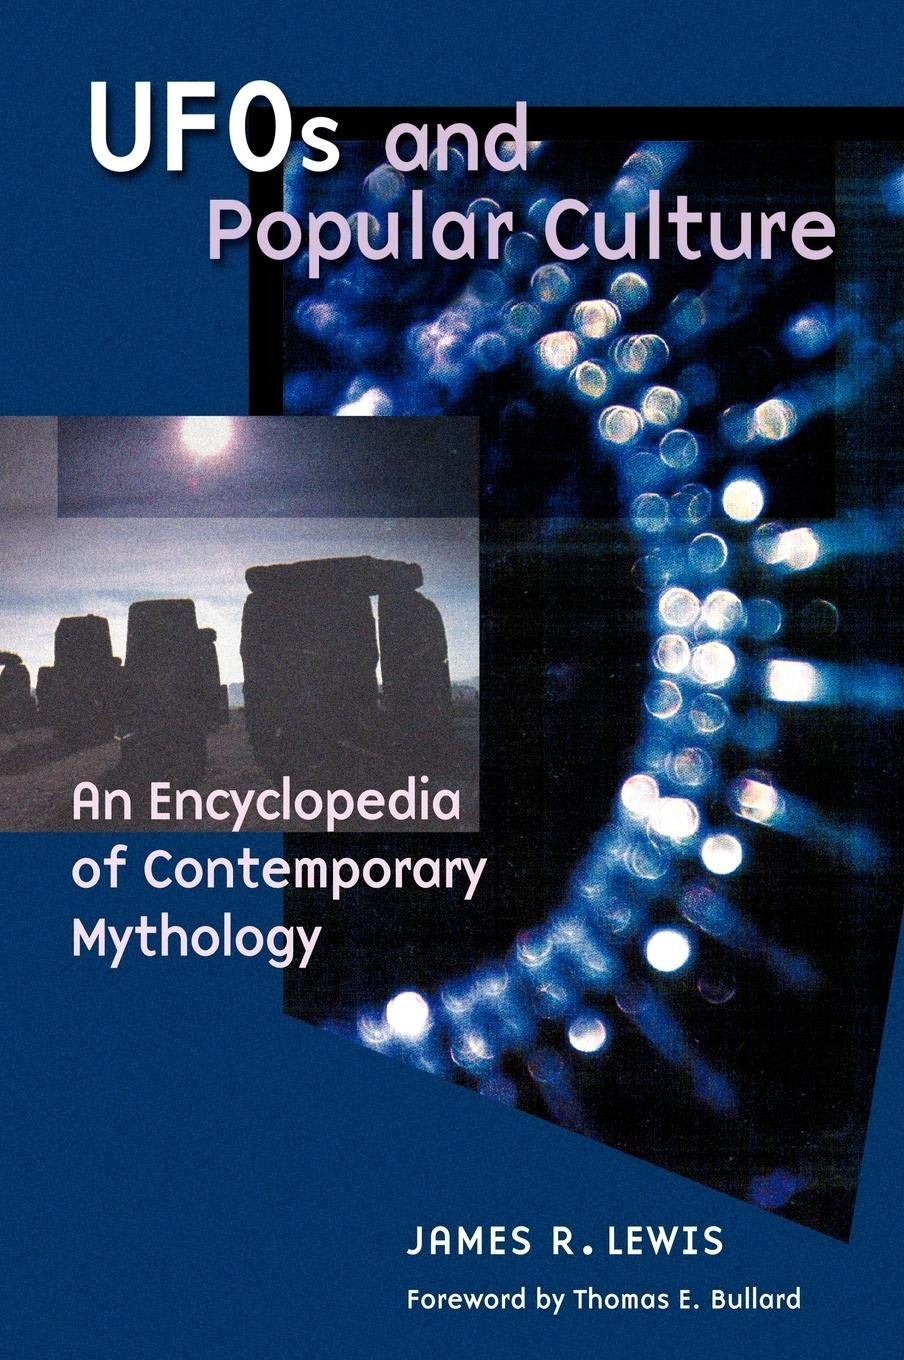 UFOs and Popular Culture: An Encyclopedia of Contemporary Myth